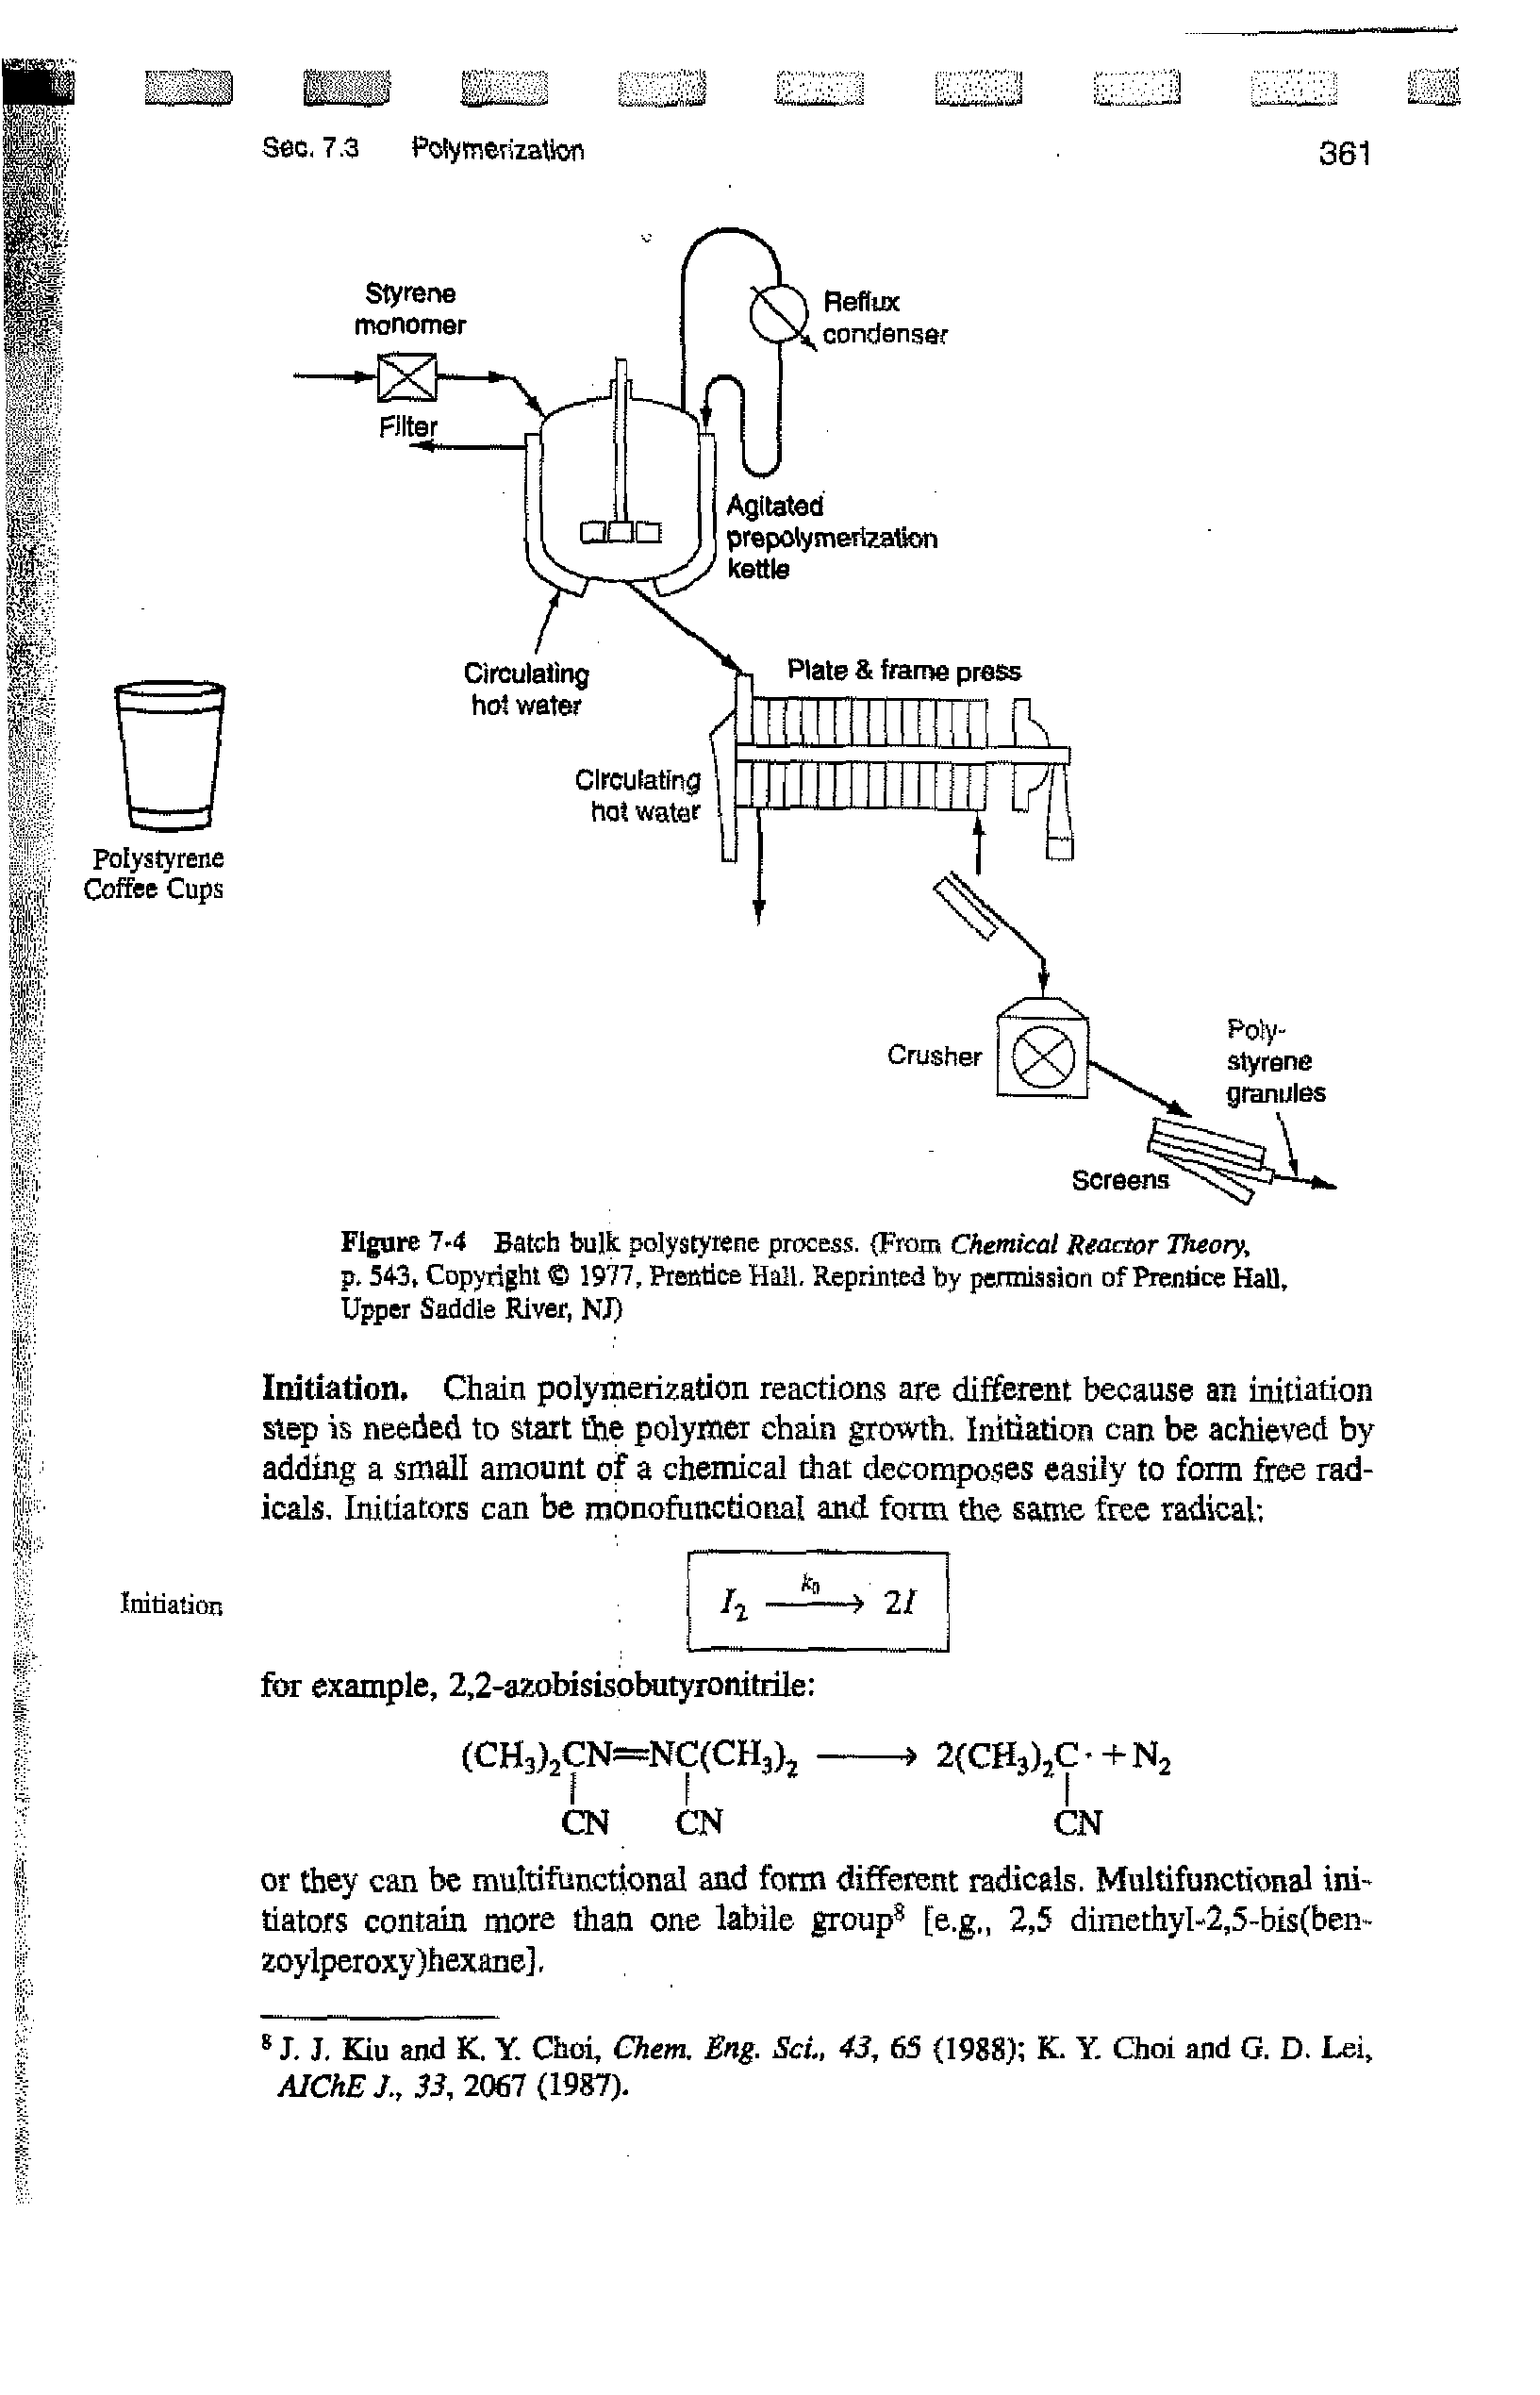 Figure 7-4 Batch bulk polystyrene process. From Chemical Reactor Theory, p, 543, Copyright 1977, Prentice Hall, Reprinted by permission of Prentice Hall,...